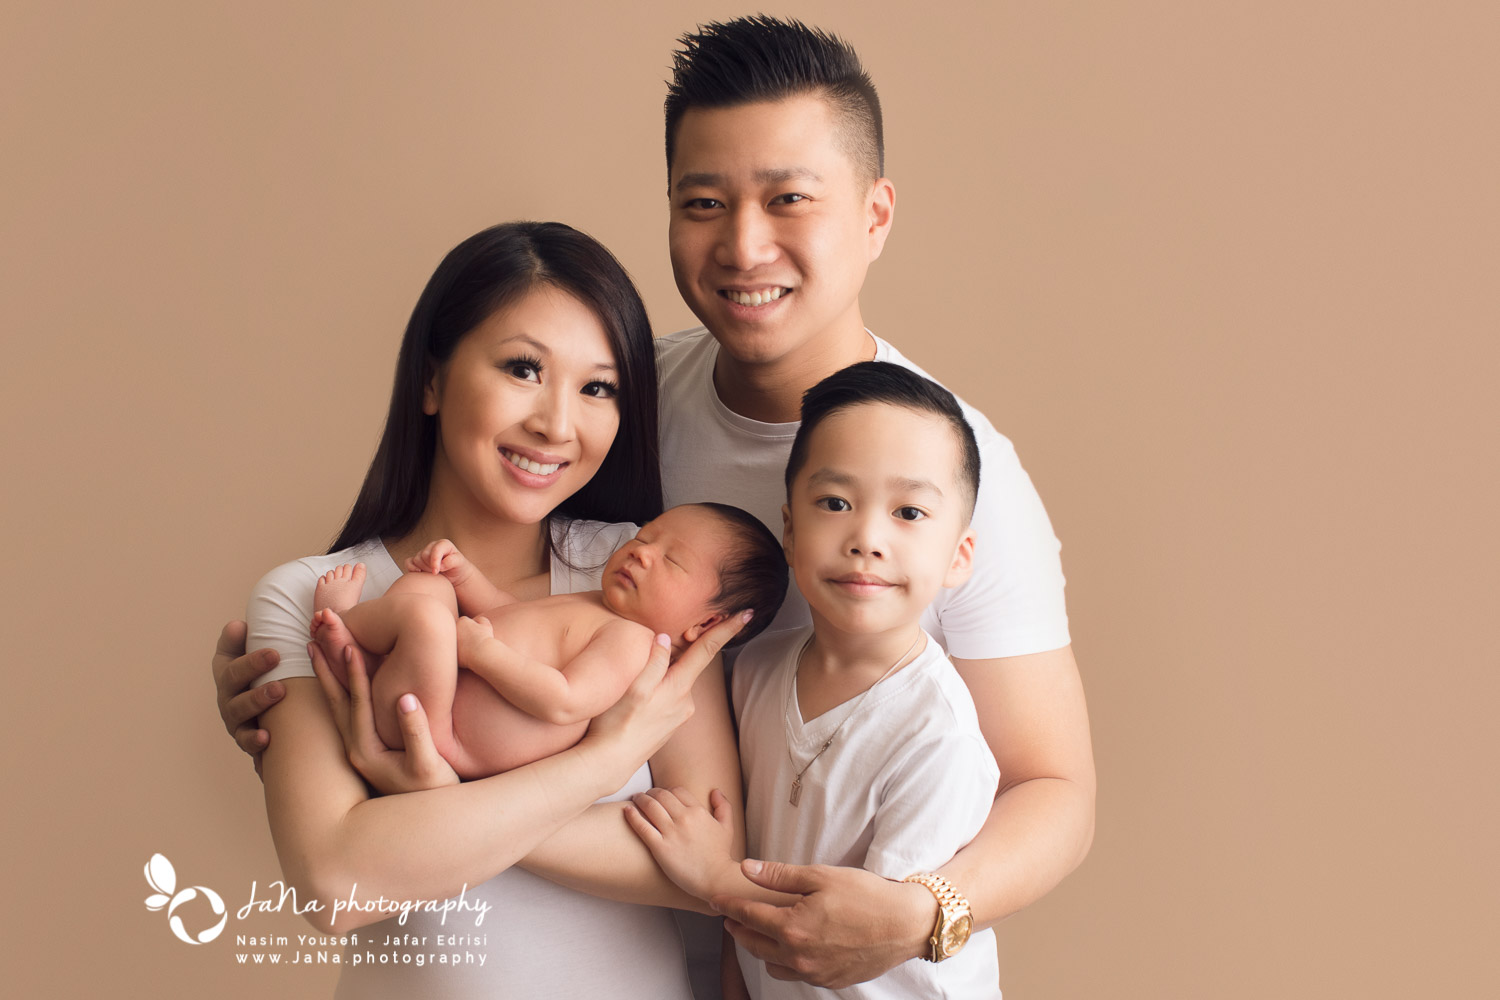 Newborn photography Vancouver - Family